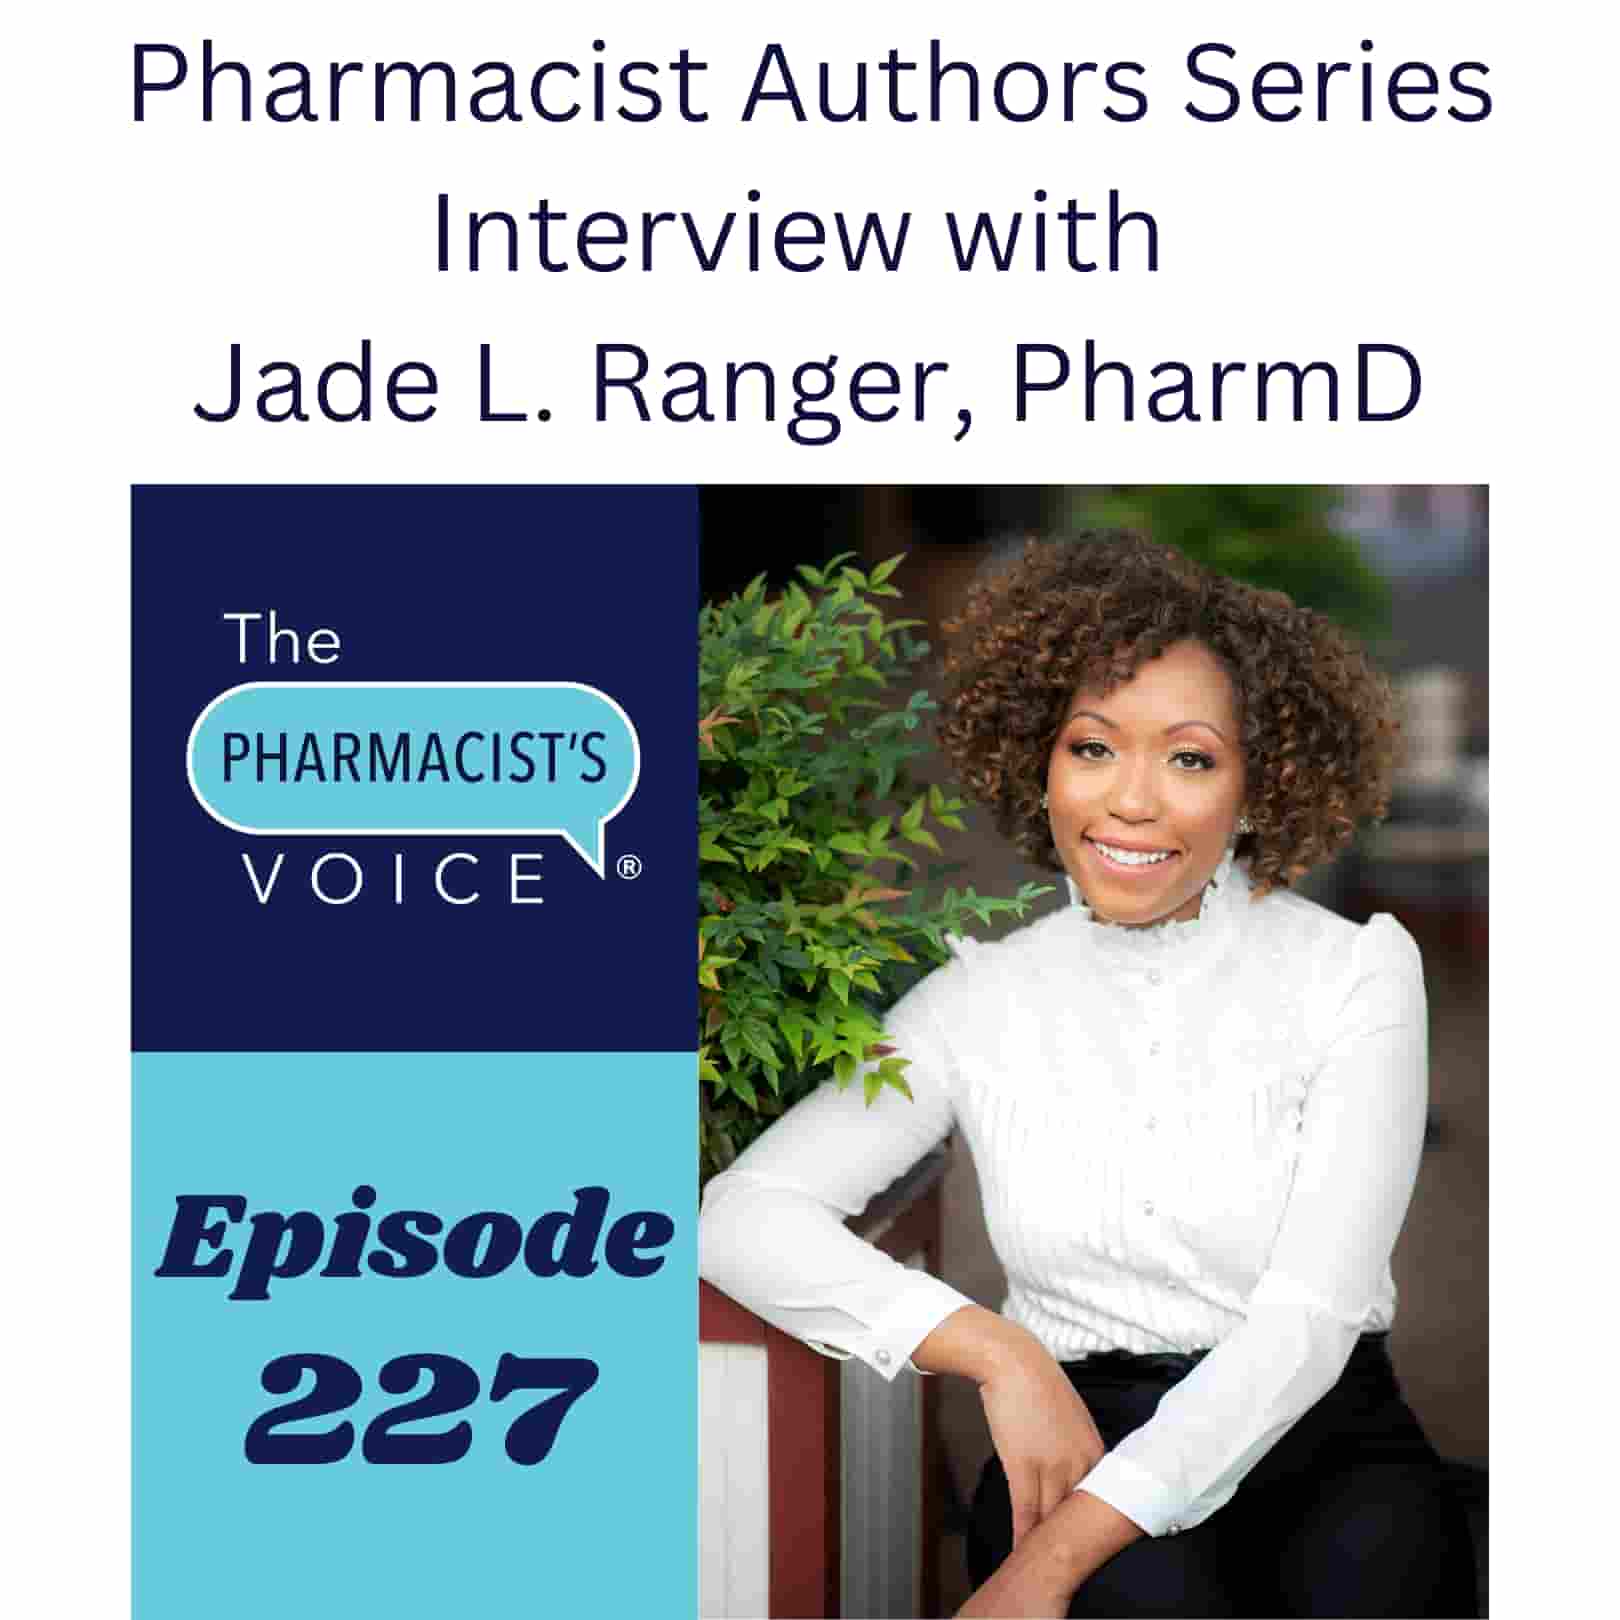 Pharmacist Authors Series Interview with Jade L. Ranger, PharmD. The Pharmacist's Voice Podcast Episode 227.